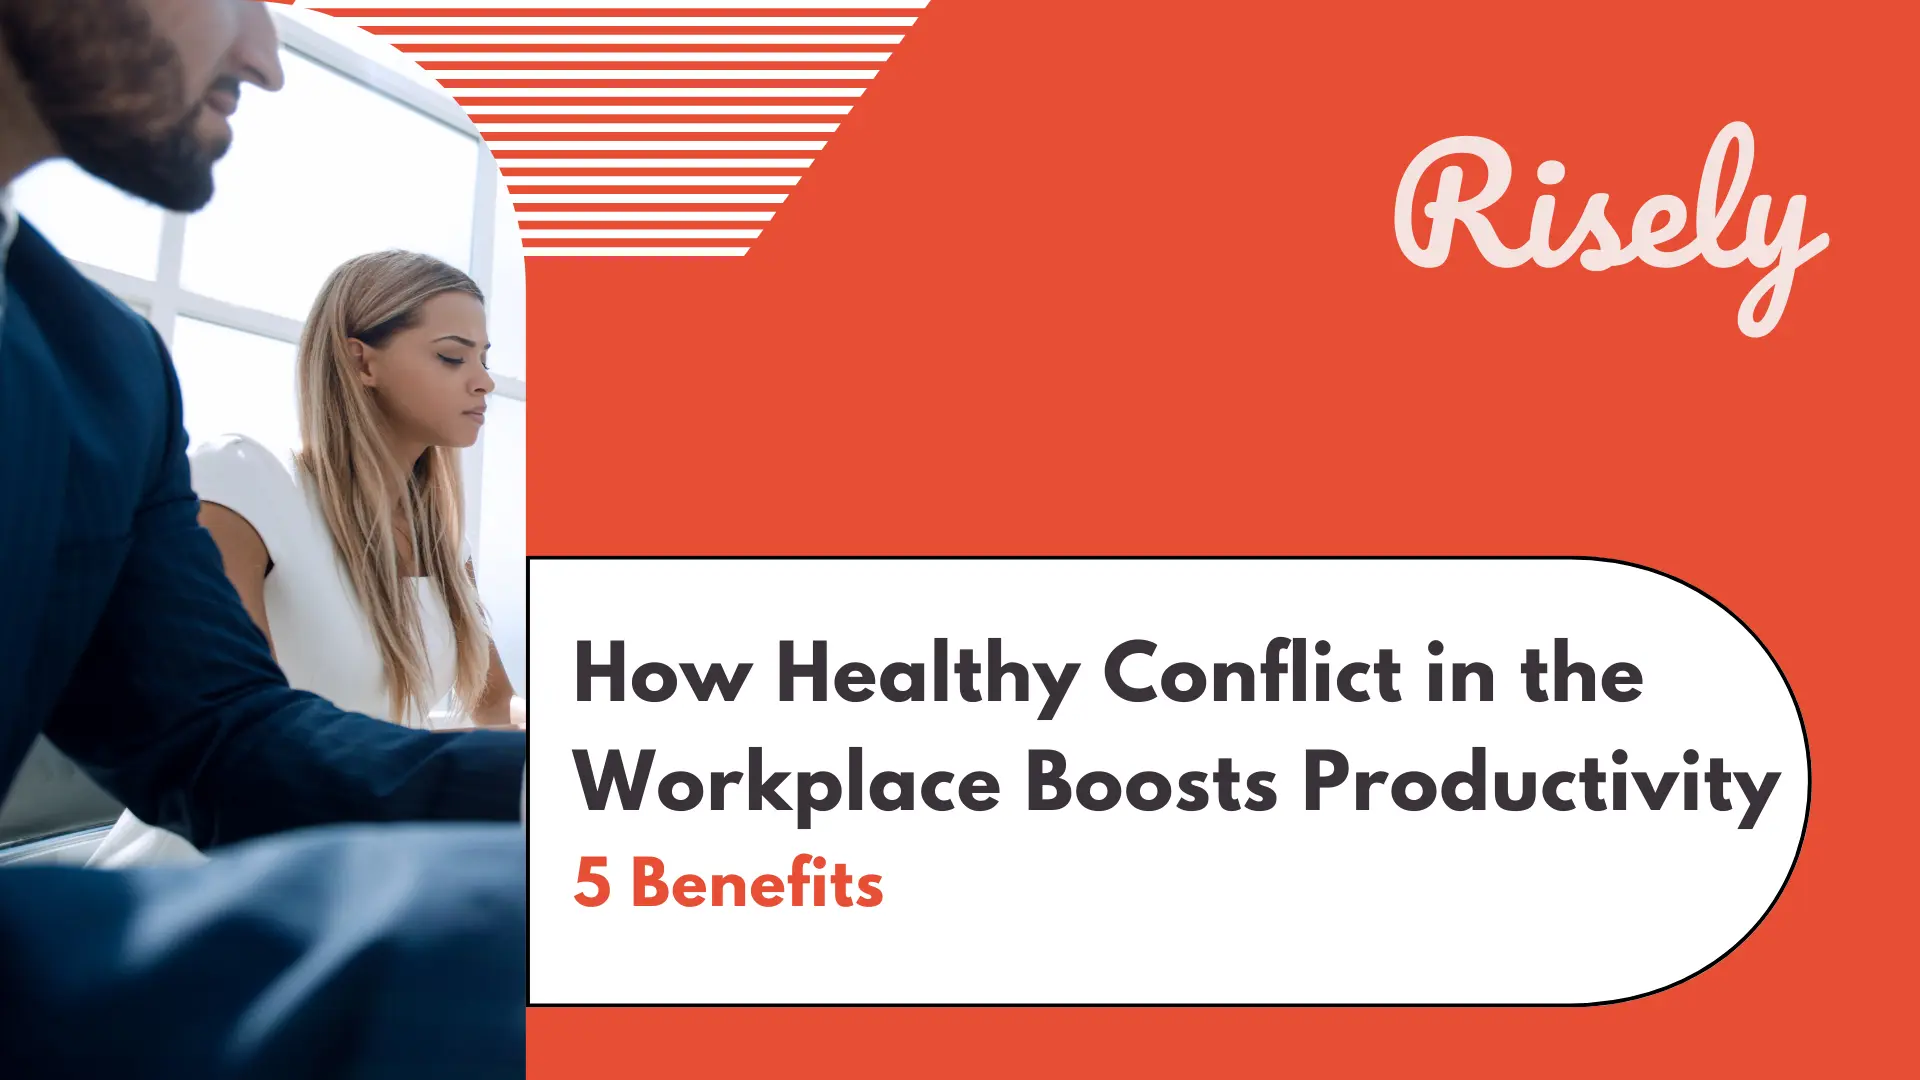 How Healthy Conflict in the Workplace Boosts Productivity: 5 Benefits